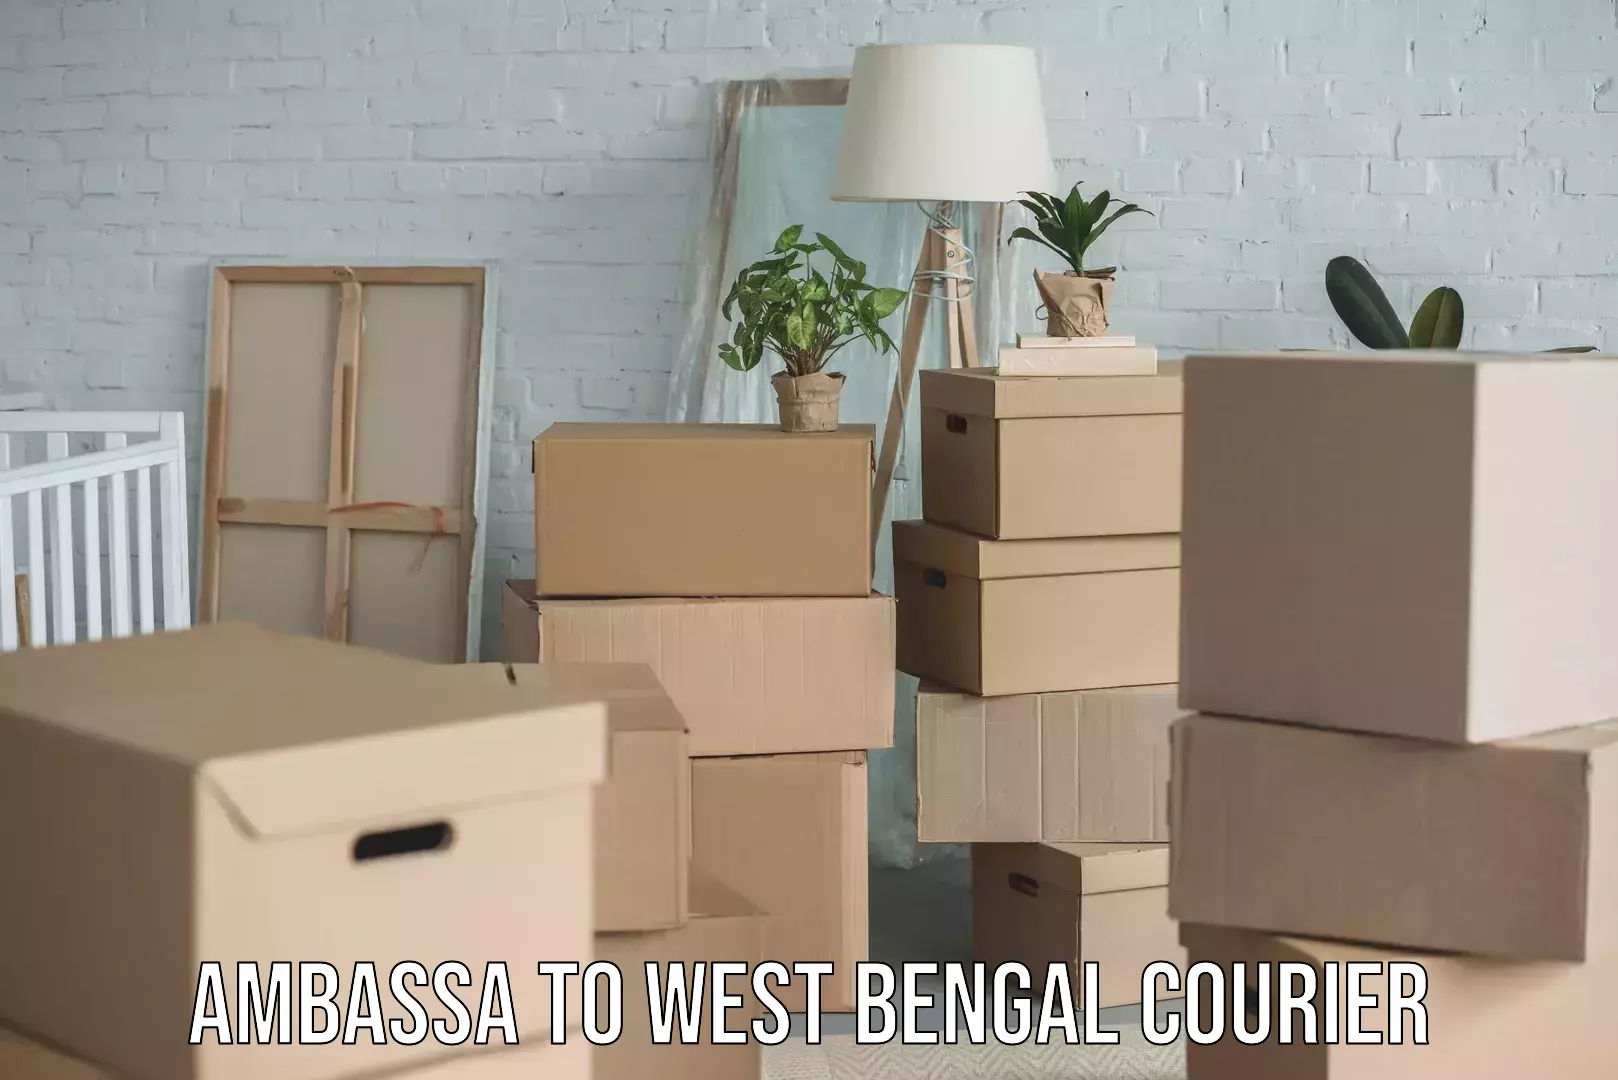 Courier service innovation Ambassa to West Bengal